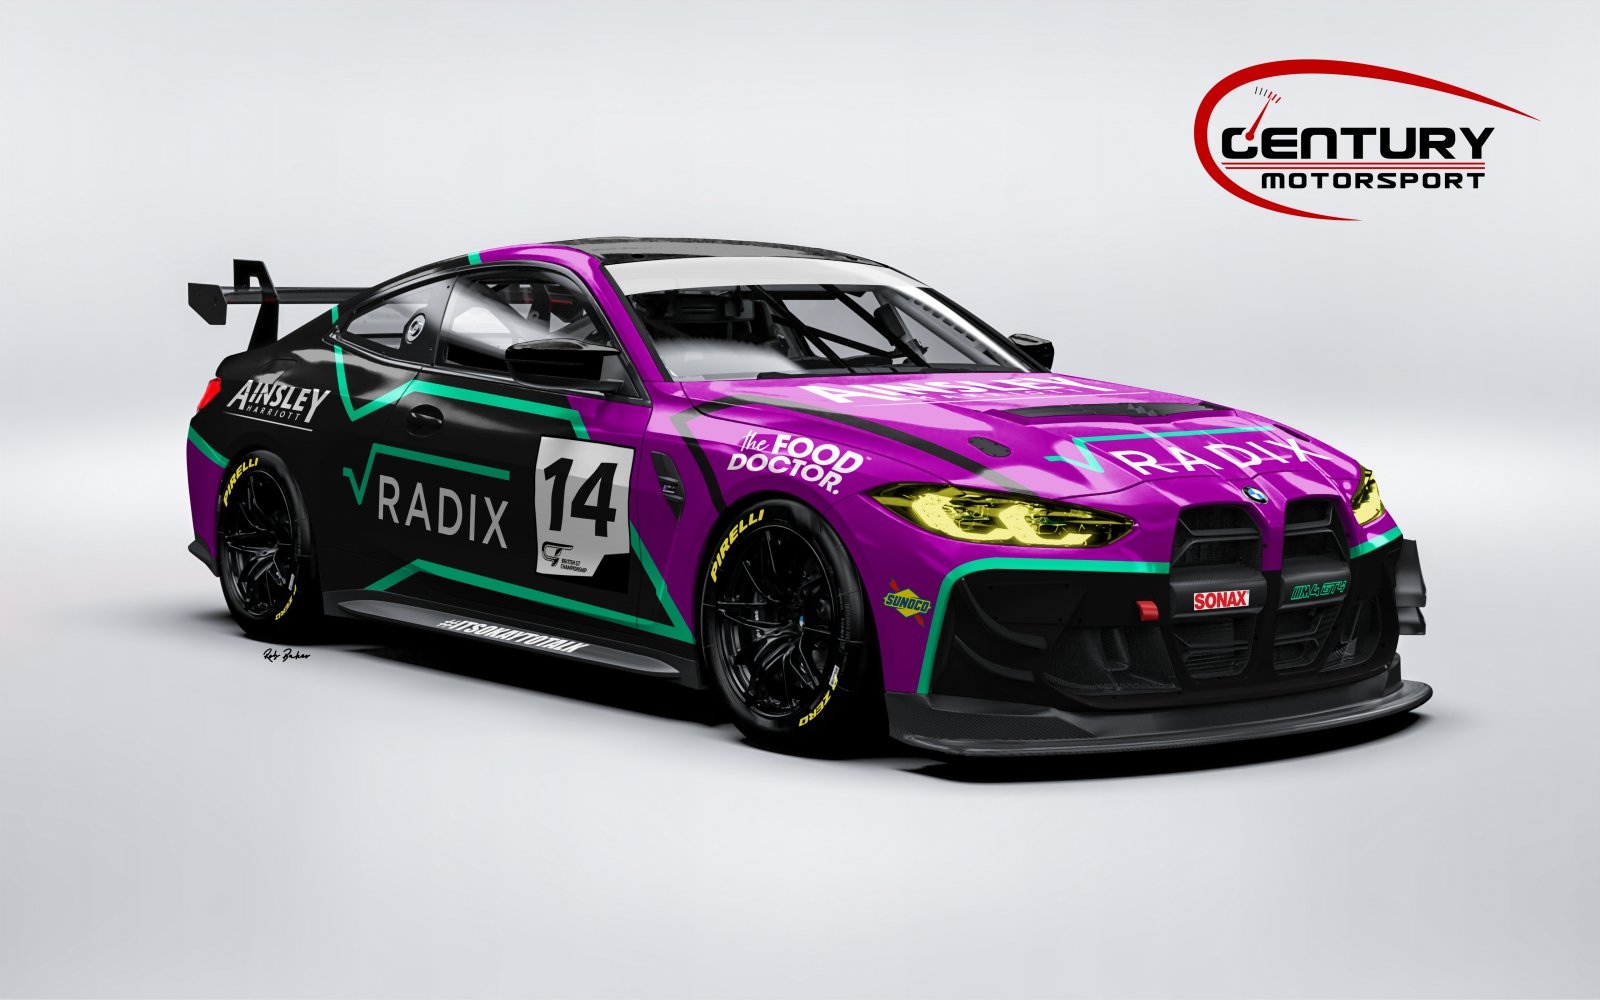 Century Motorsport have revealed their new look 'Harriot's Chariot' along with the four drivers who will contest the new BMW M4 GT4's inaugural British GT Campaign.